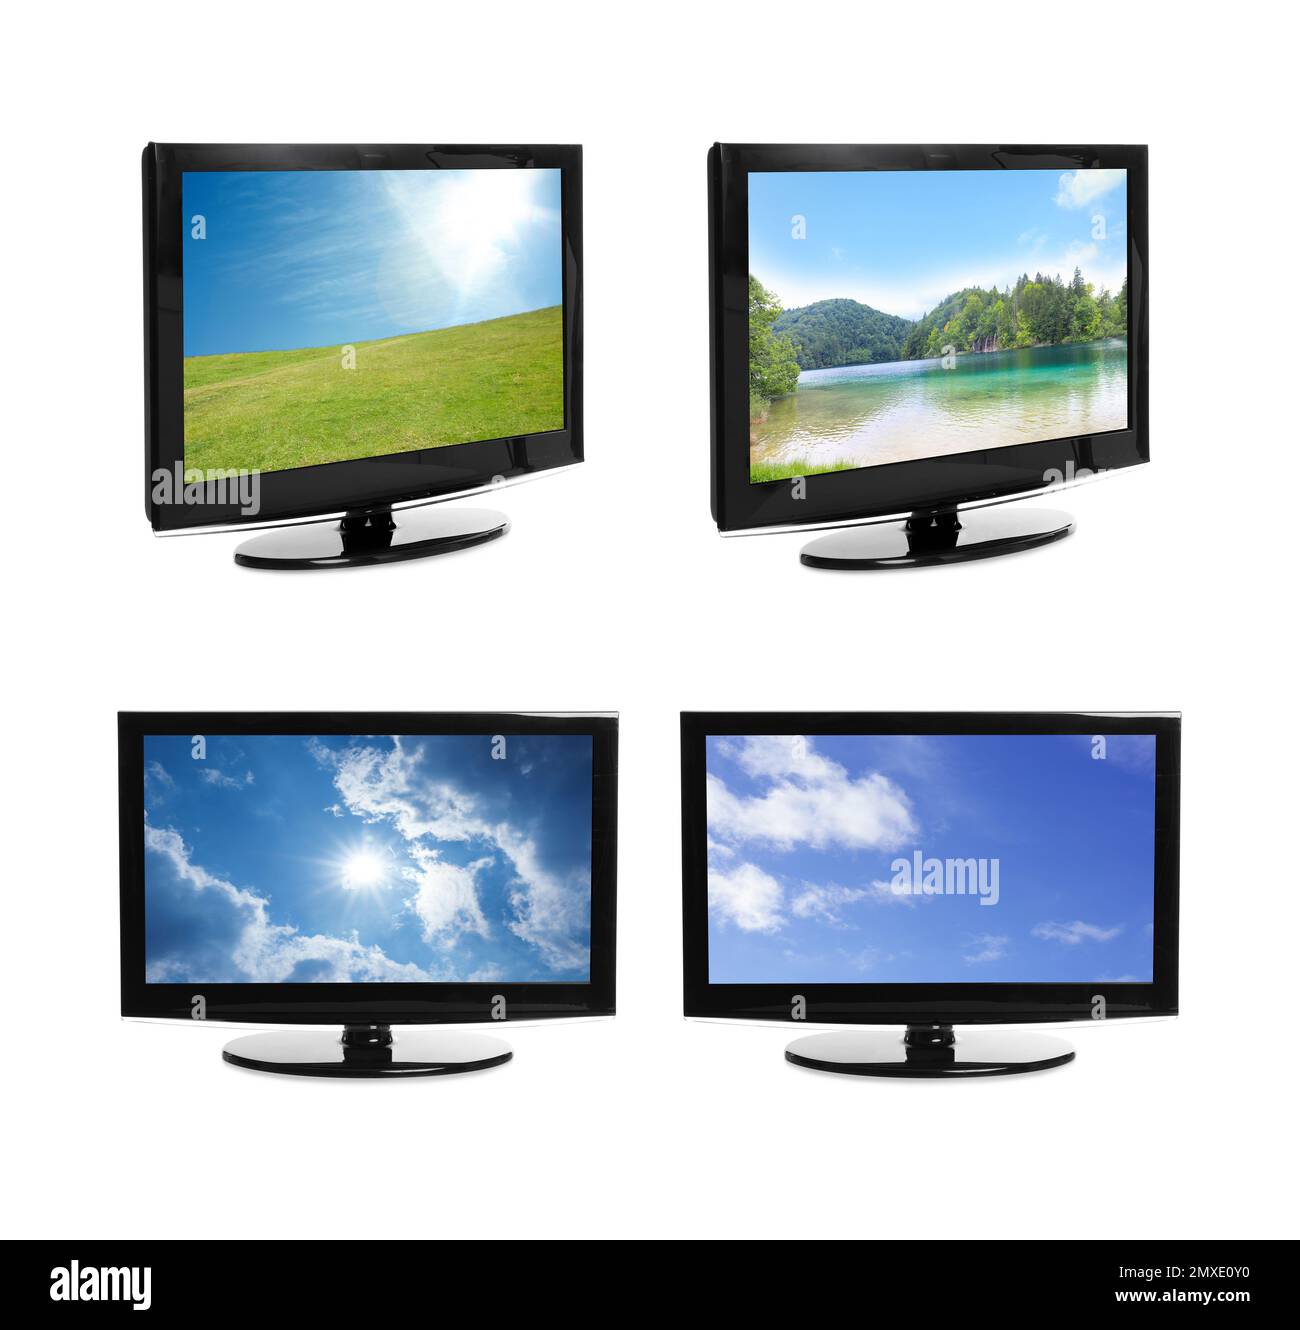 Set of modern plasma TVs with landscape on screens against white background Stock Photo